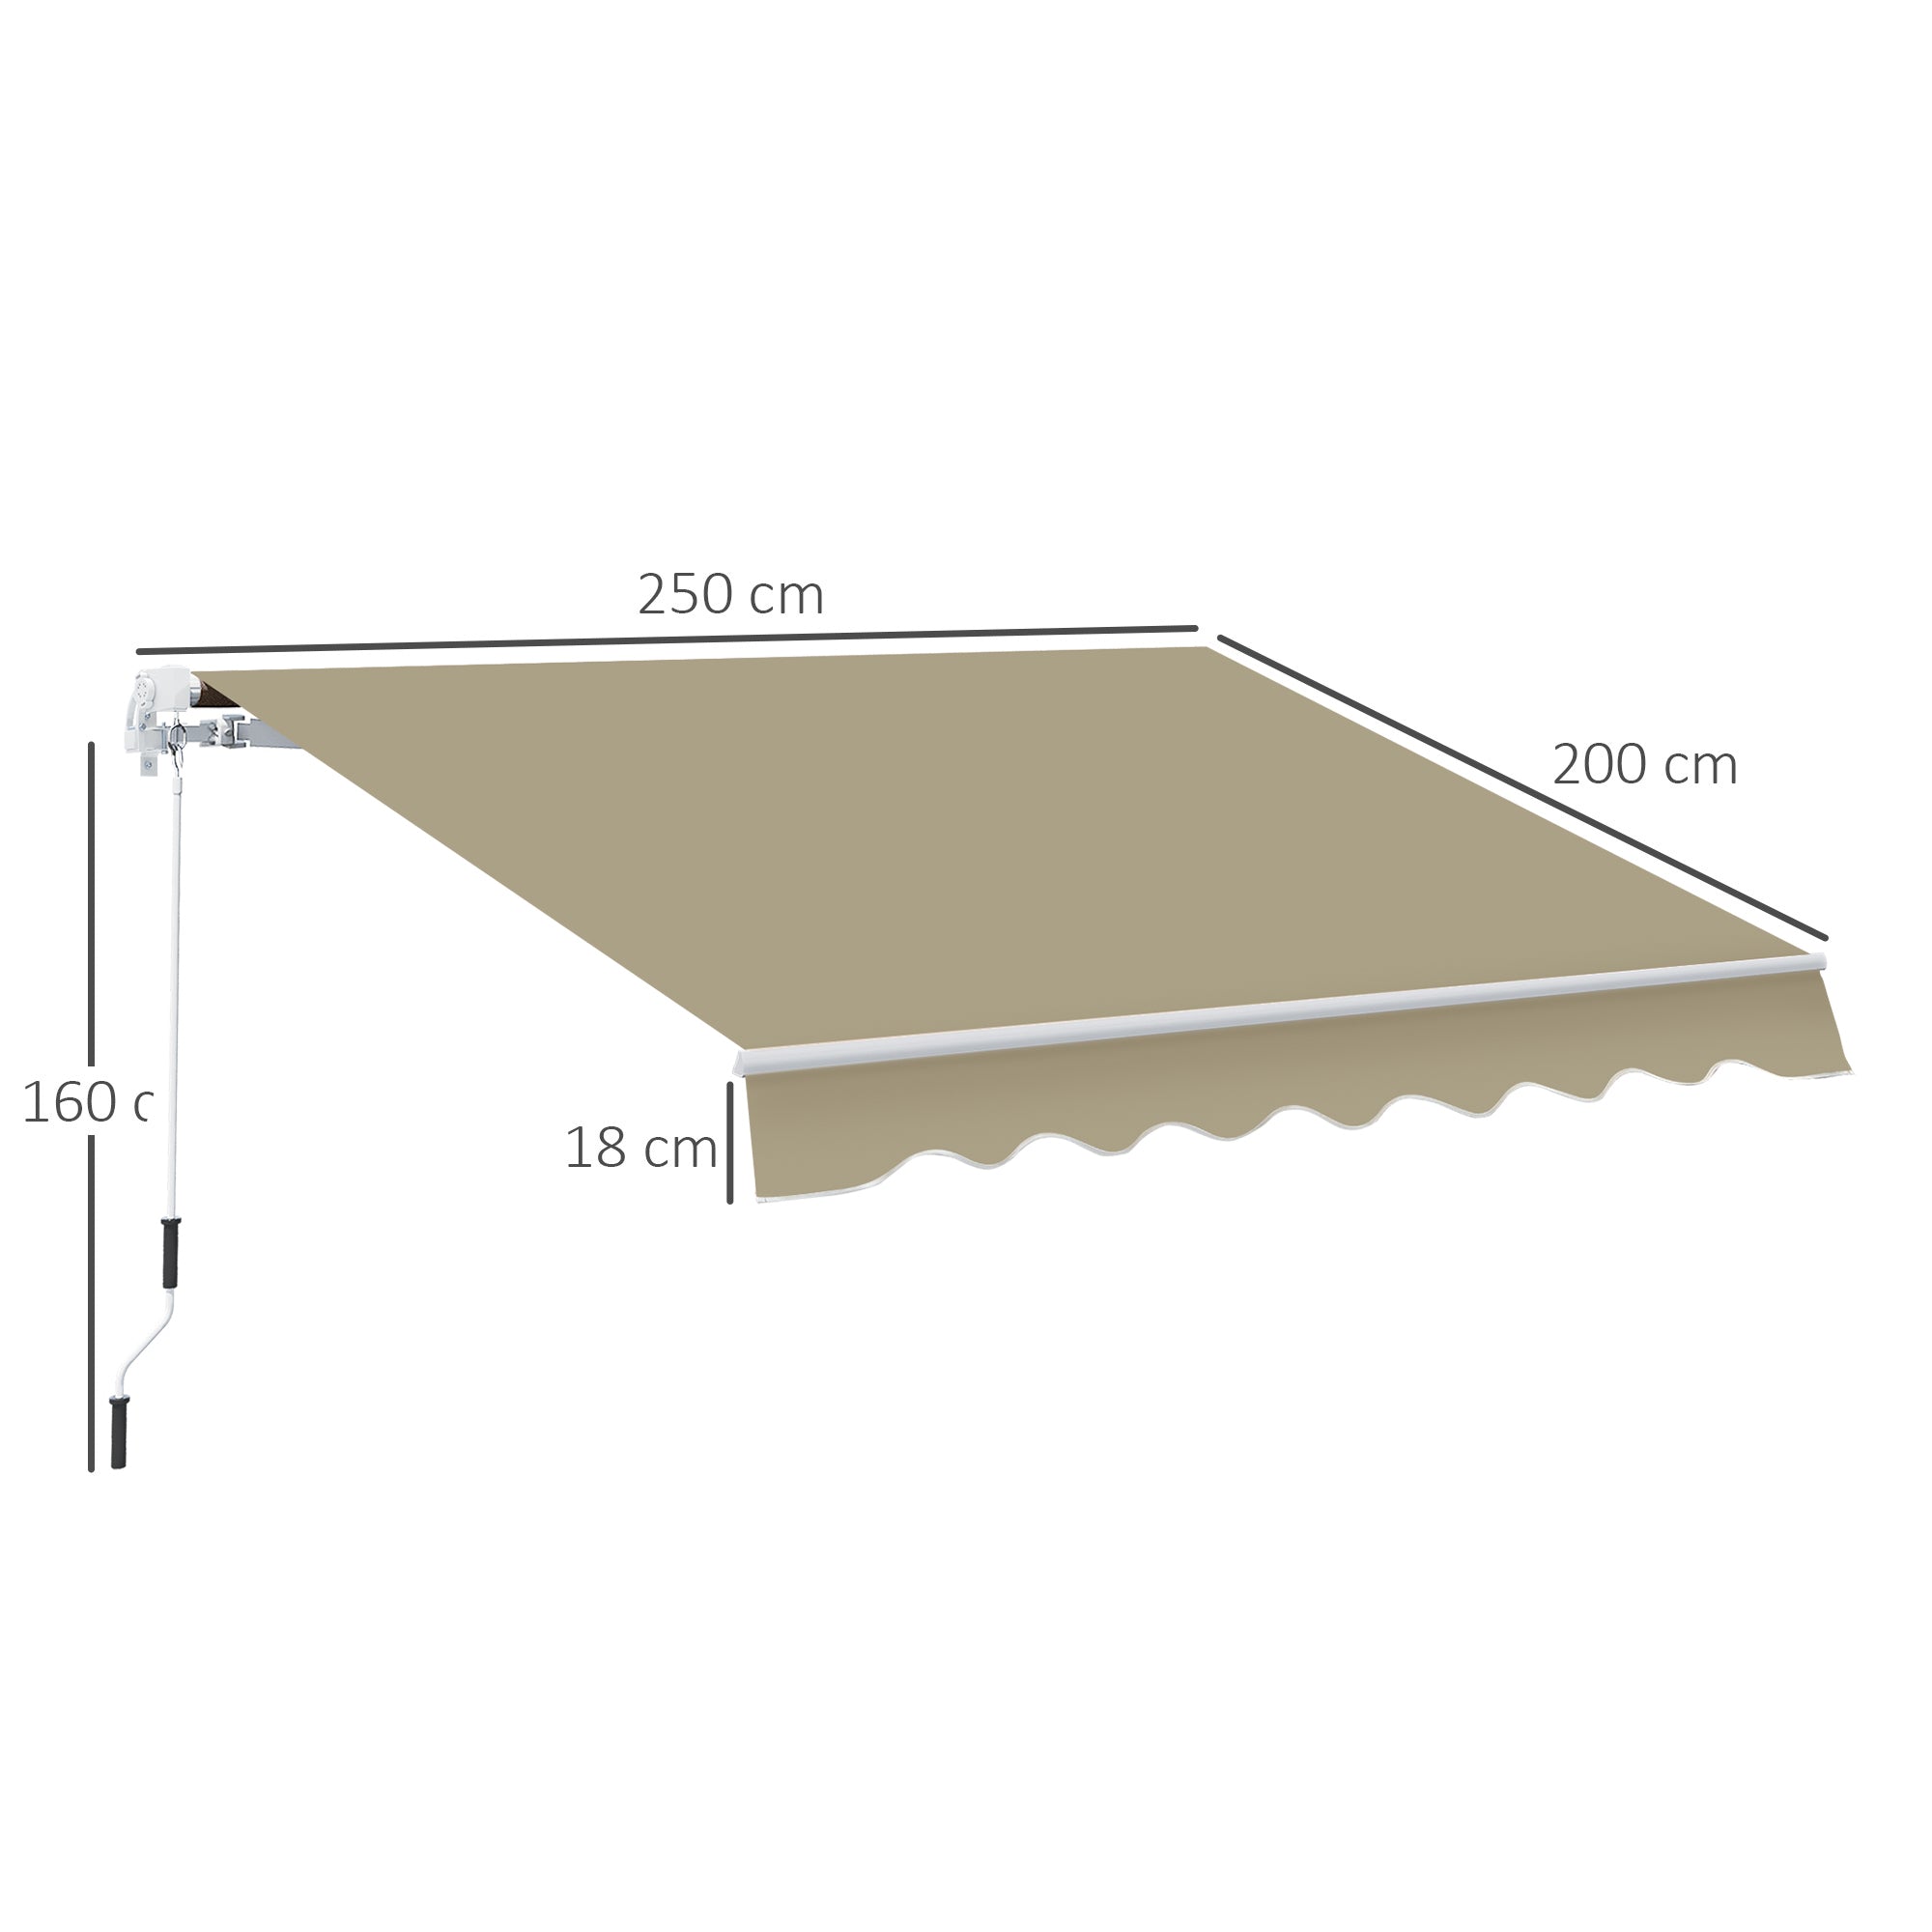 Outsunny 2.5x2 m Manual Retractable Awning-Beige Canopy/White Frame - Inspirely